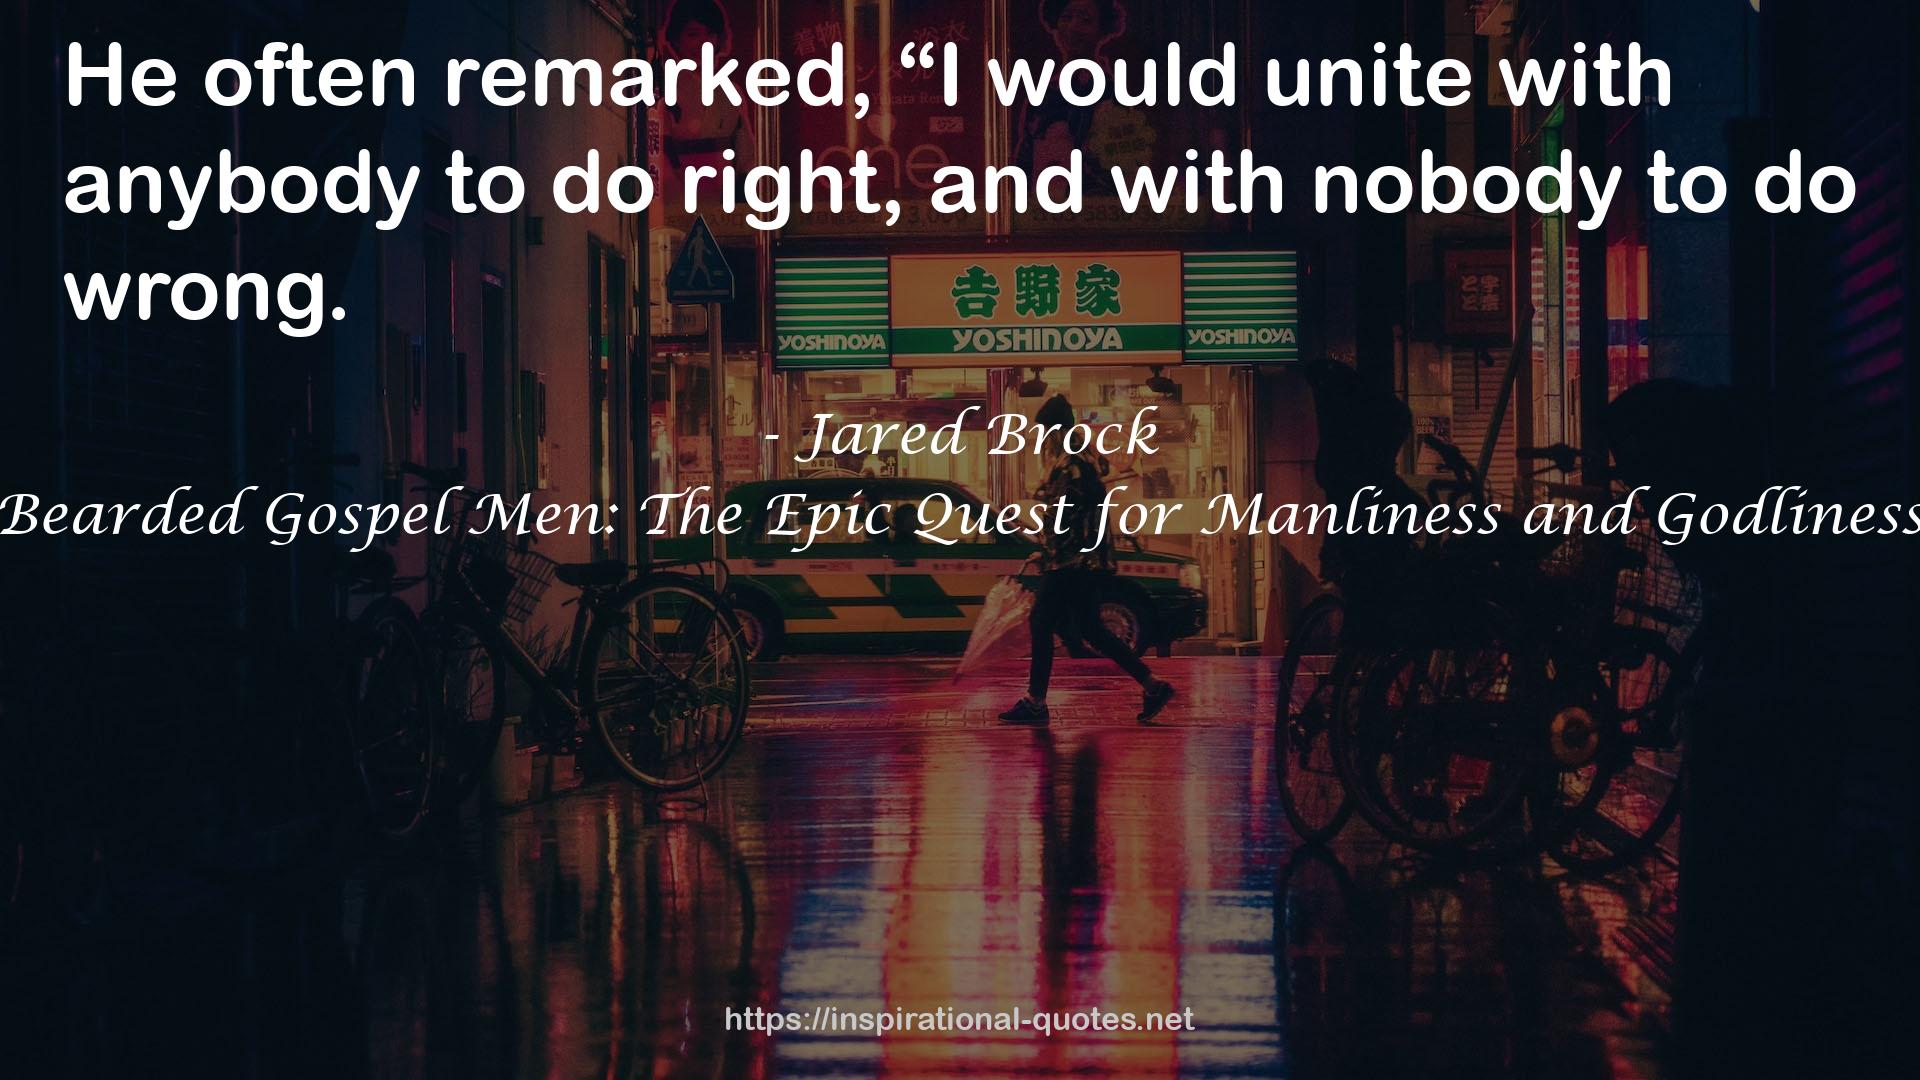 Bearded Gospel Men: The Epic Quest for Manliness and Godliness QUOTES